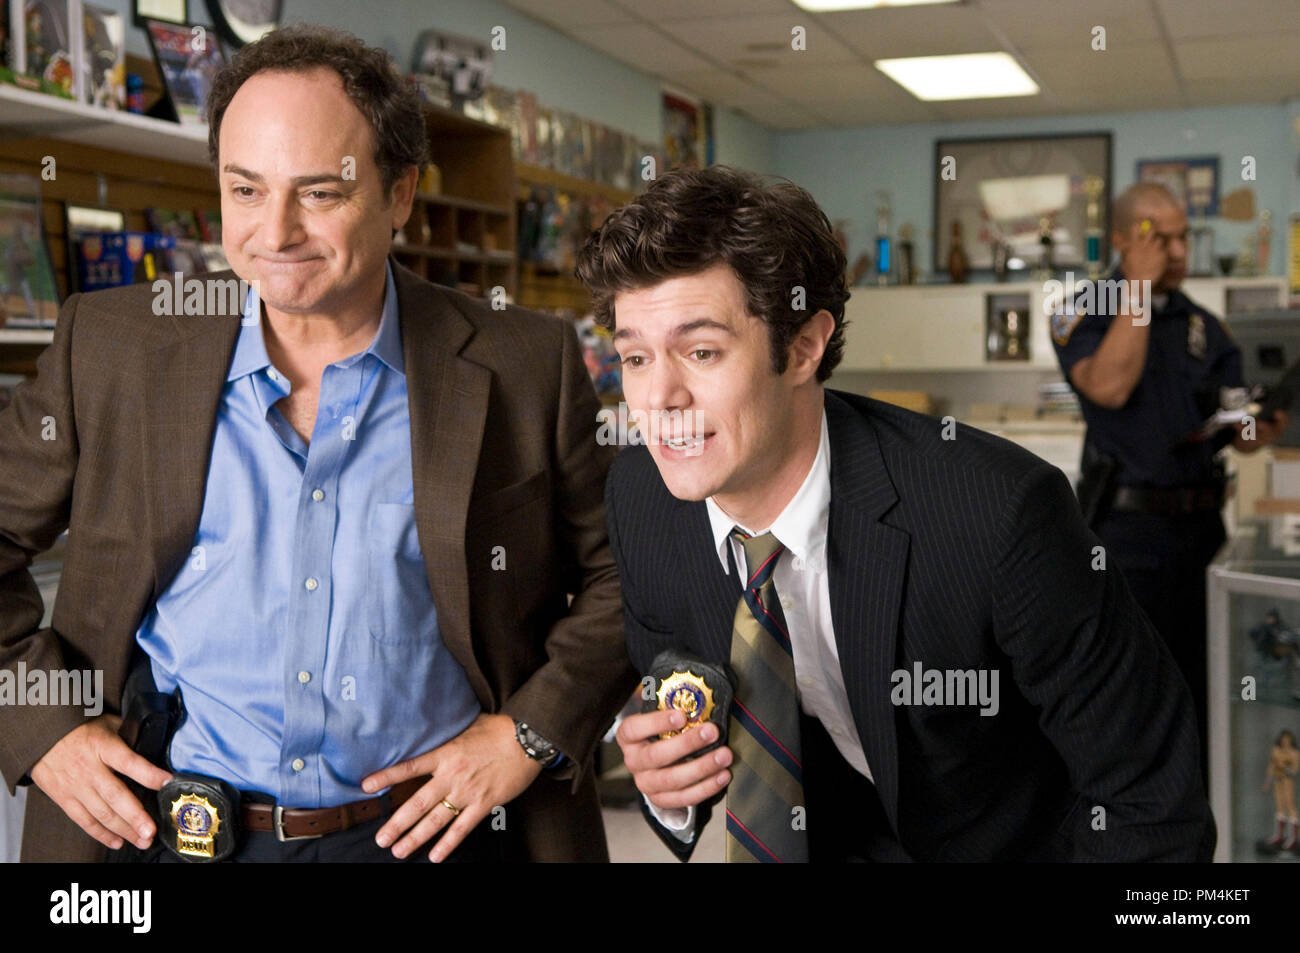 (L-r) KEVIN POLLAK as Hunsaker and ADAM BRODY as Barry Mangold in Warner Bros. Pictures’ crime comedy “Cop Out.” Stock Photo